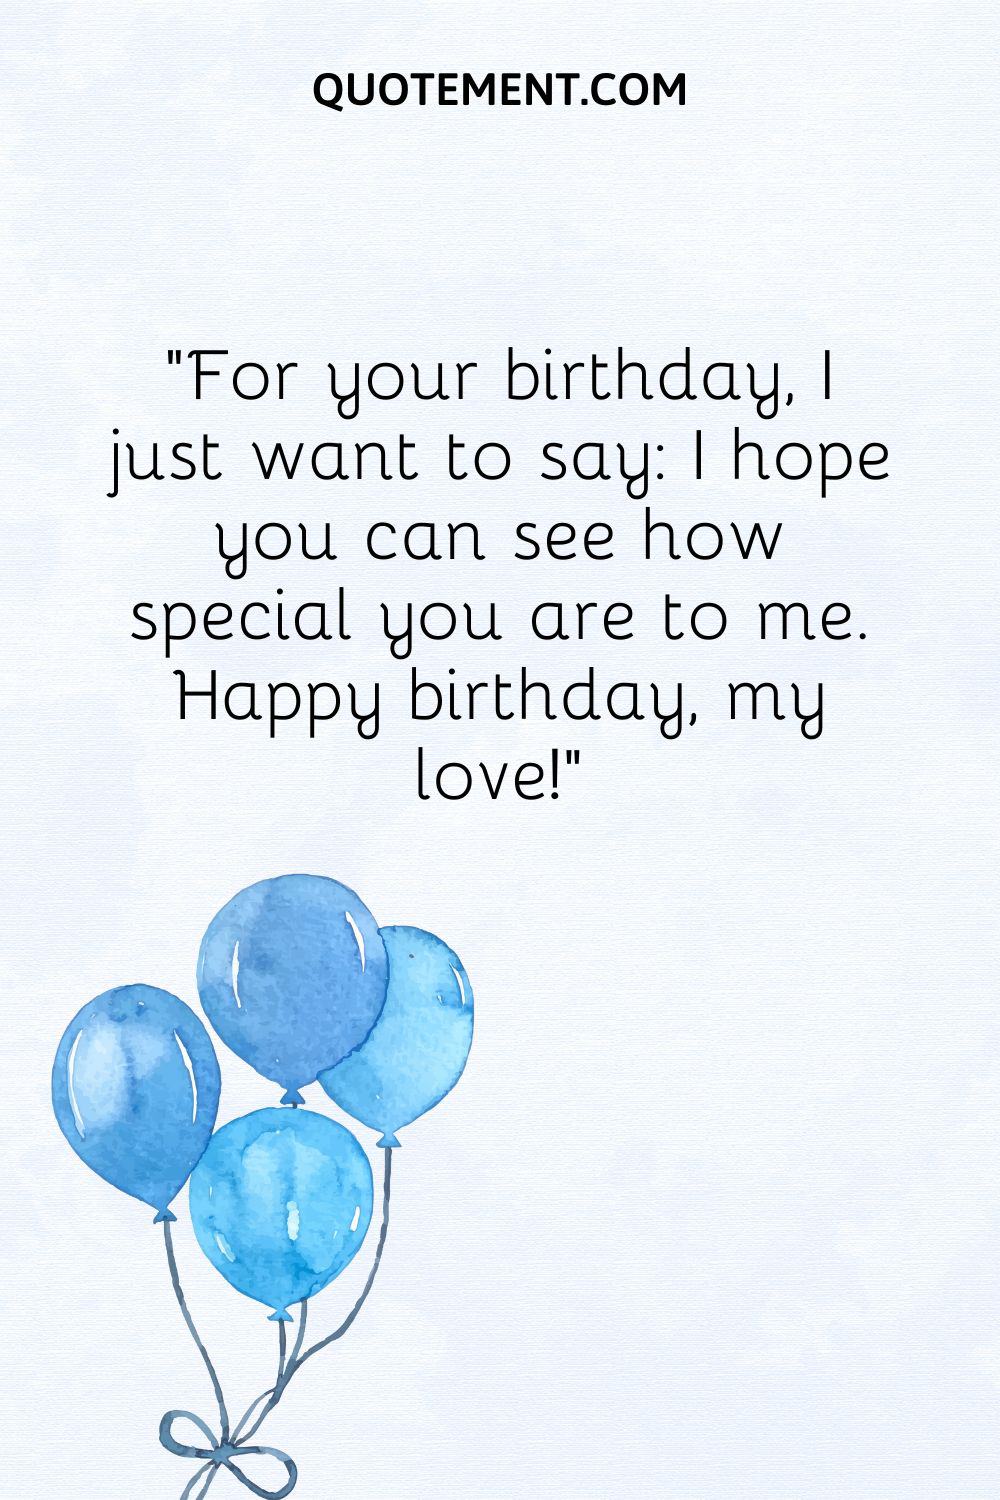 For your birthday, I just want to say I hope you can see how special you are to me.